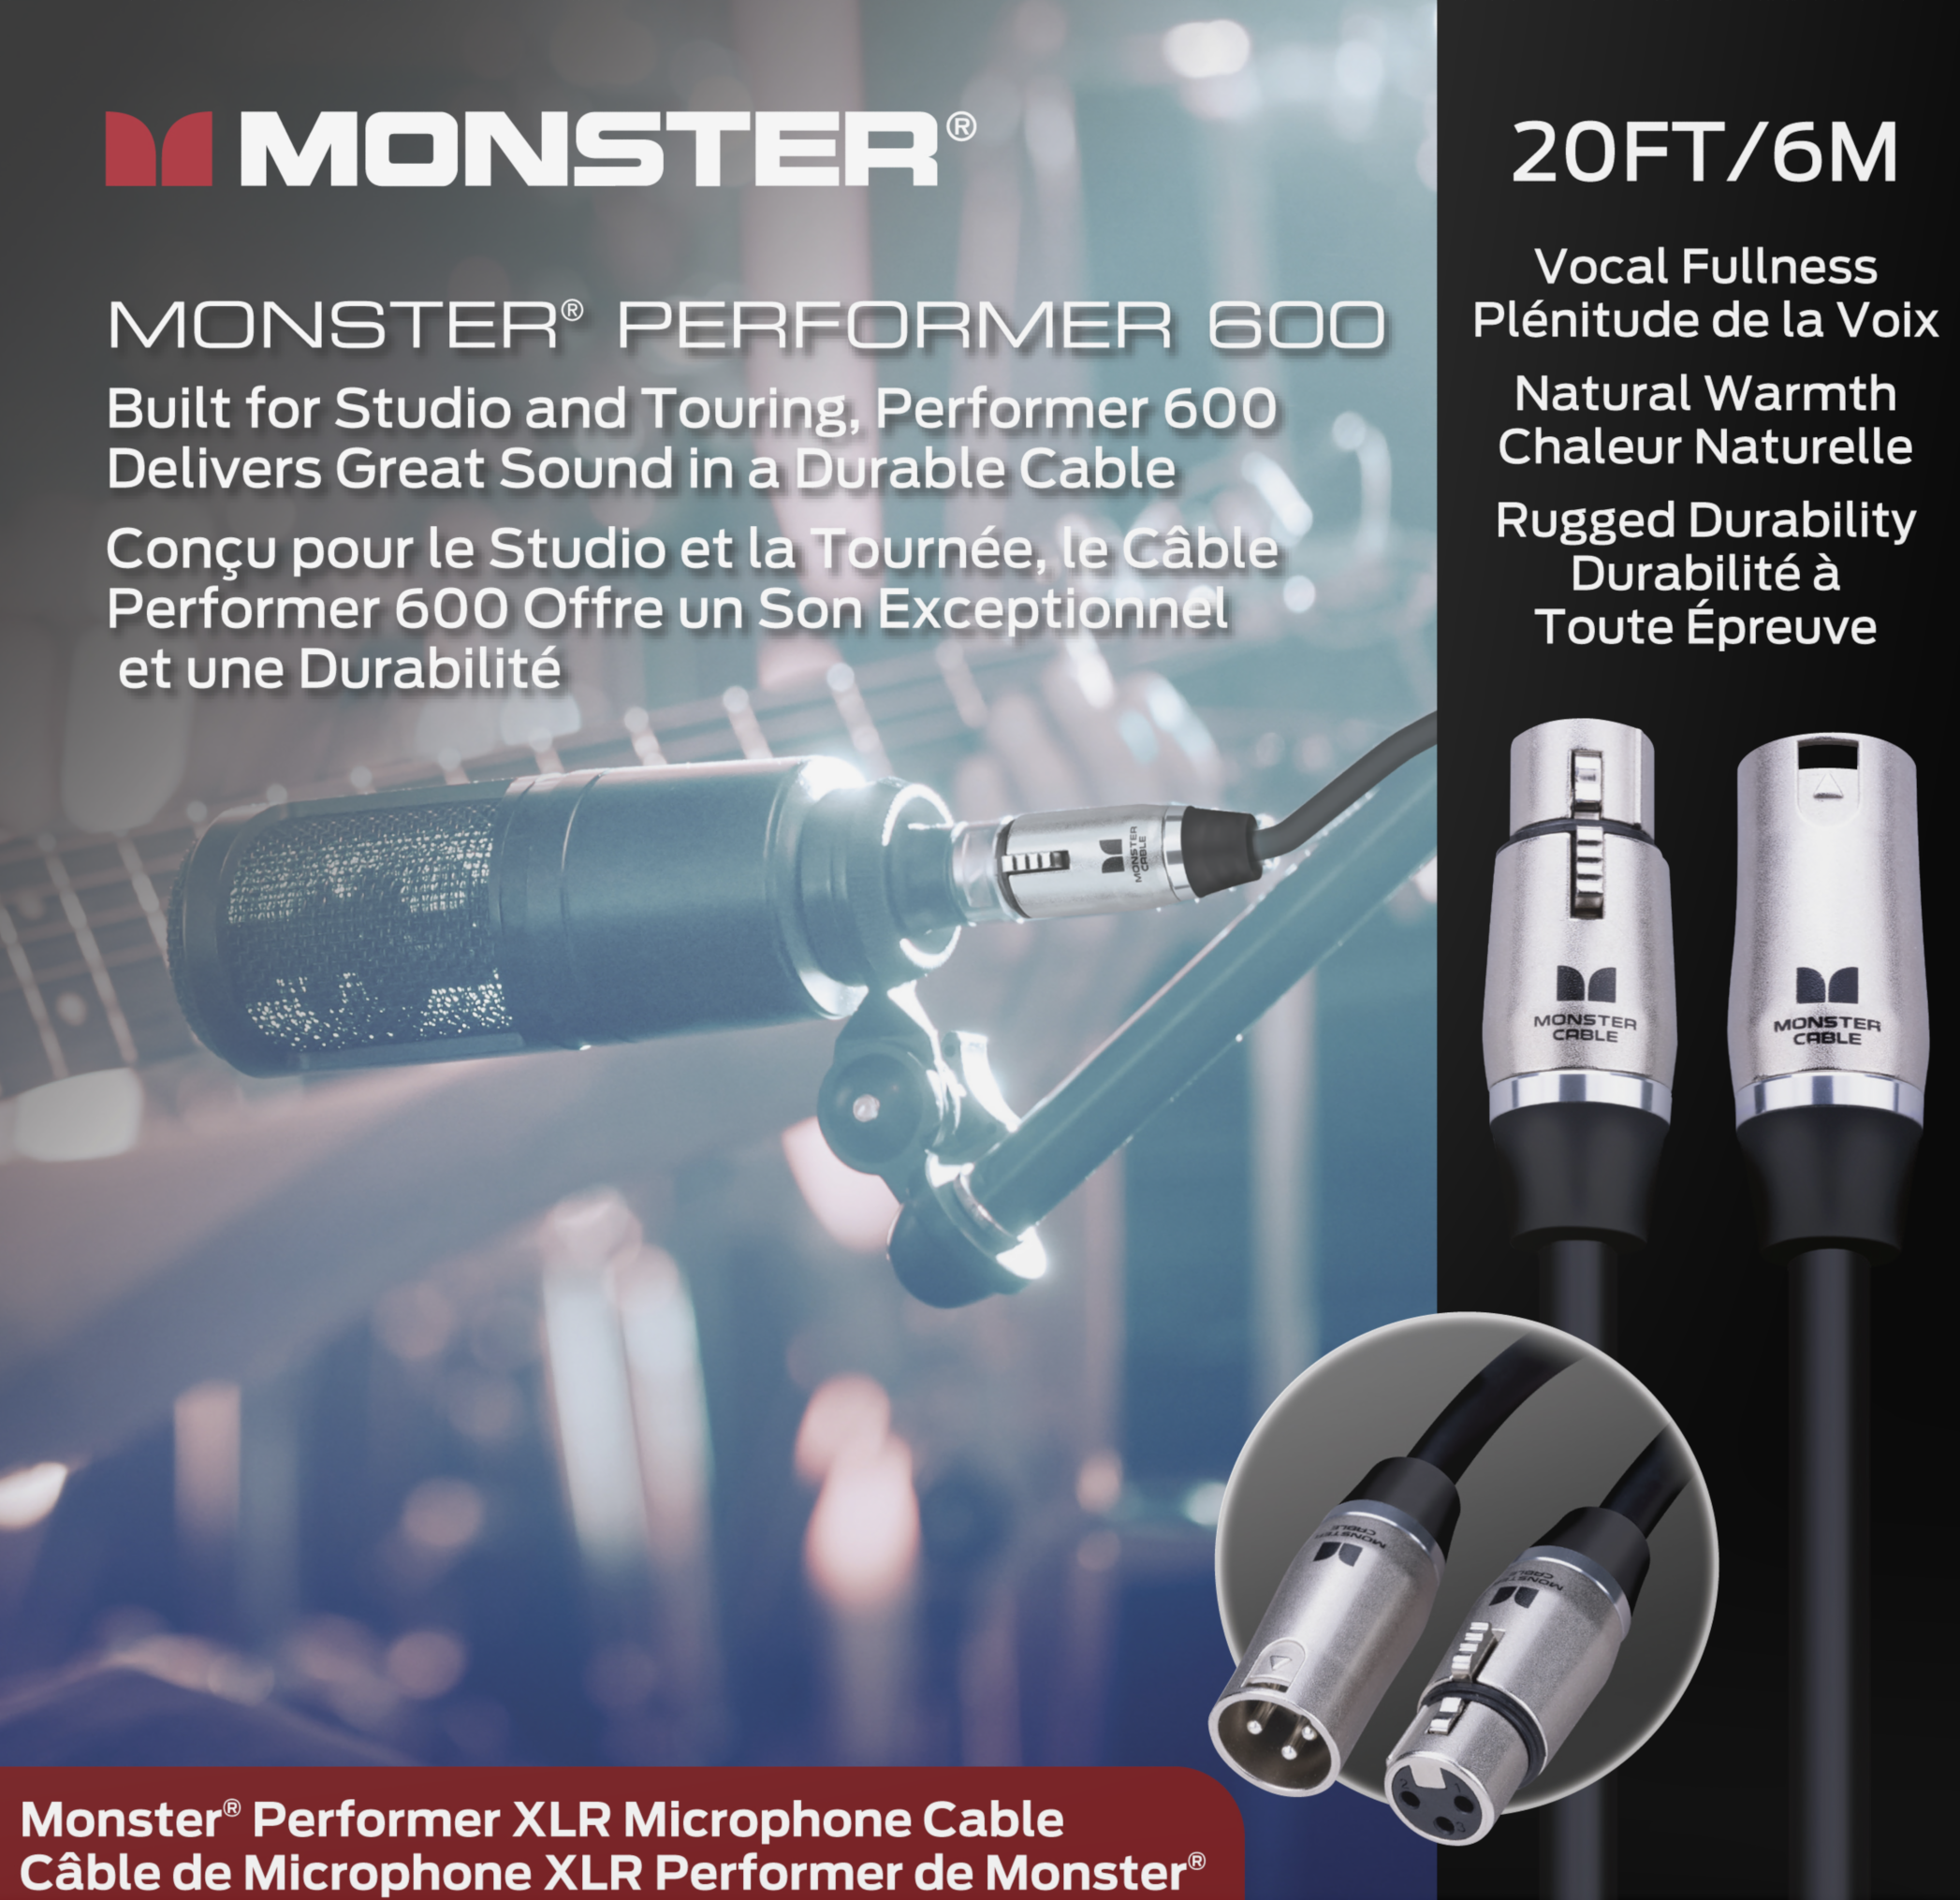 Monster® Prolink Performer™ 600 Microphone Cable - HIENDGUITAR 20ft(6m) 20ft(6m) Monstercable Cable